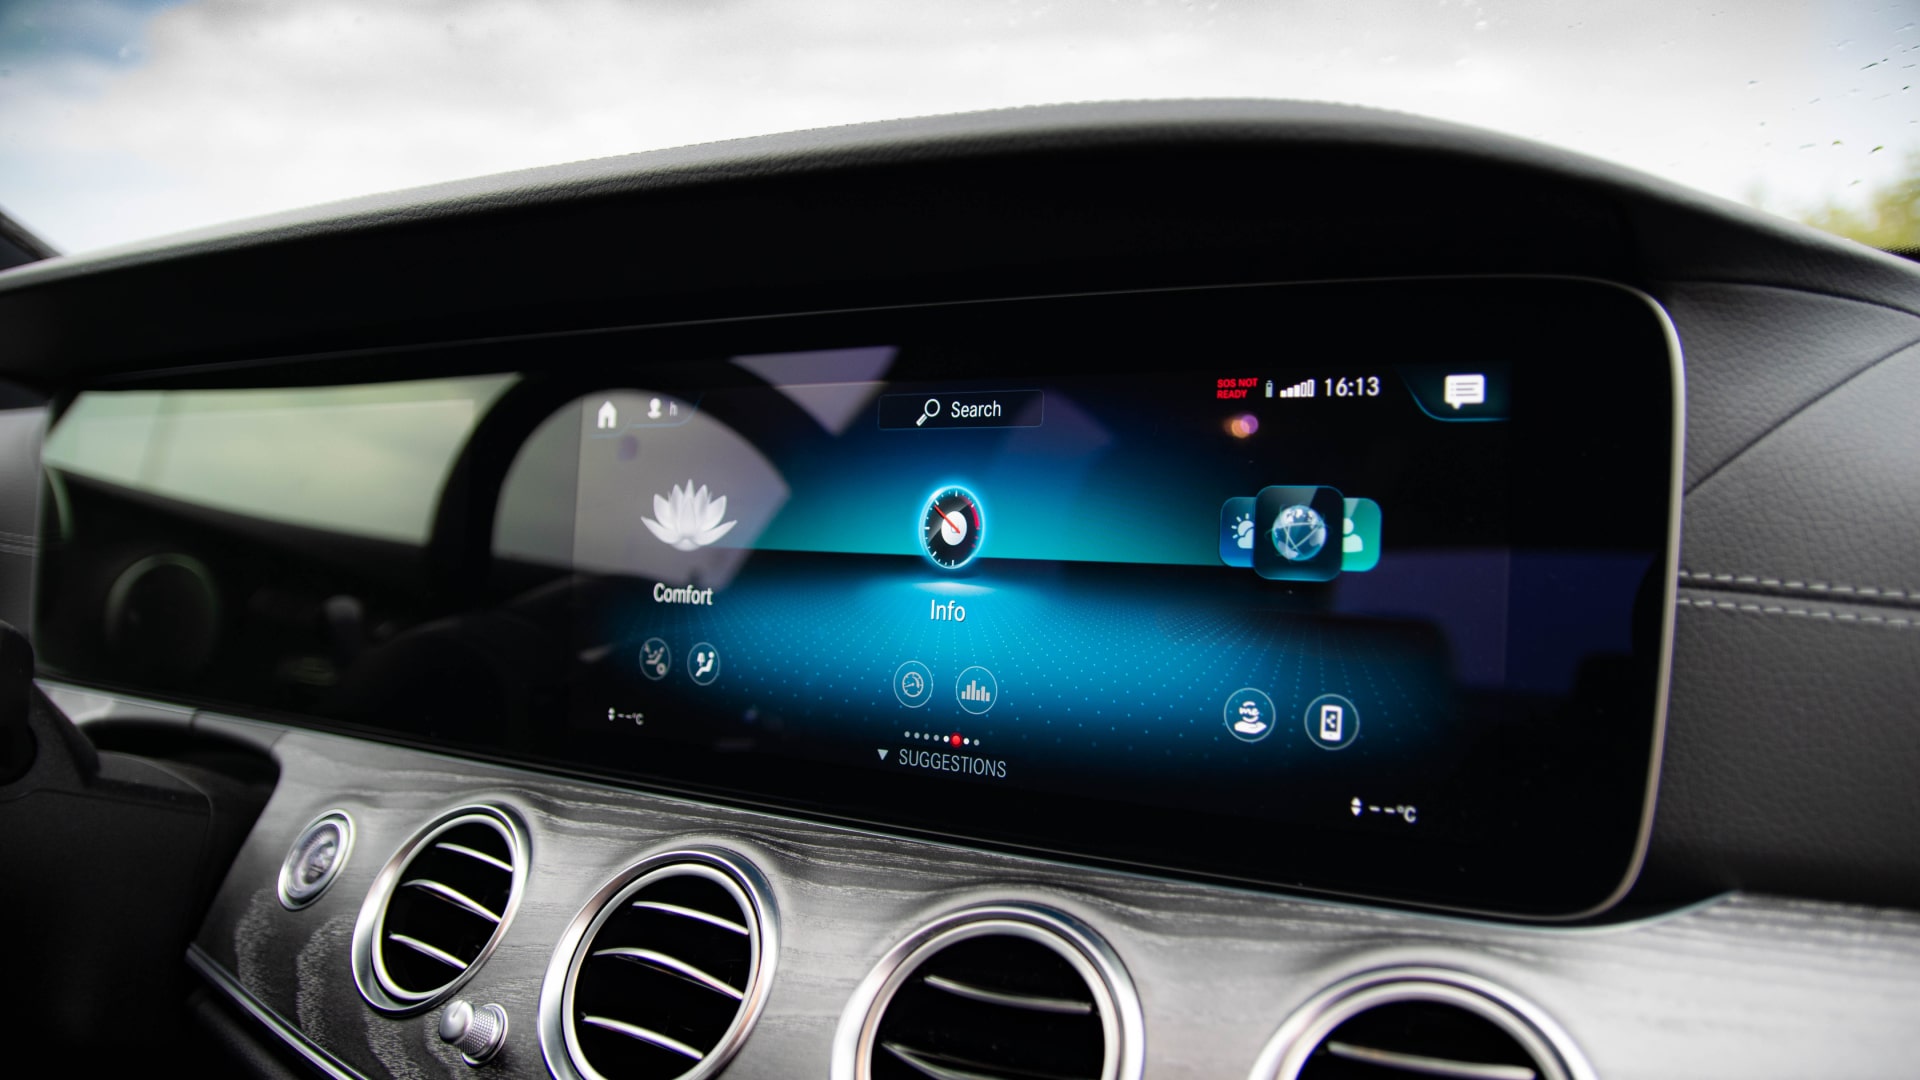 Designing In-Vehicle Infotainment Systems in 2023